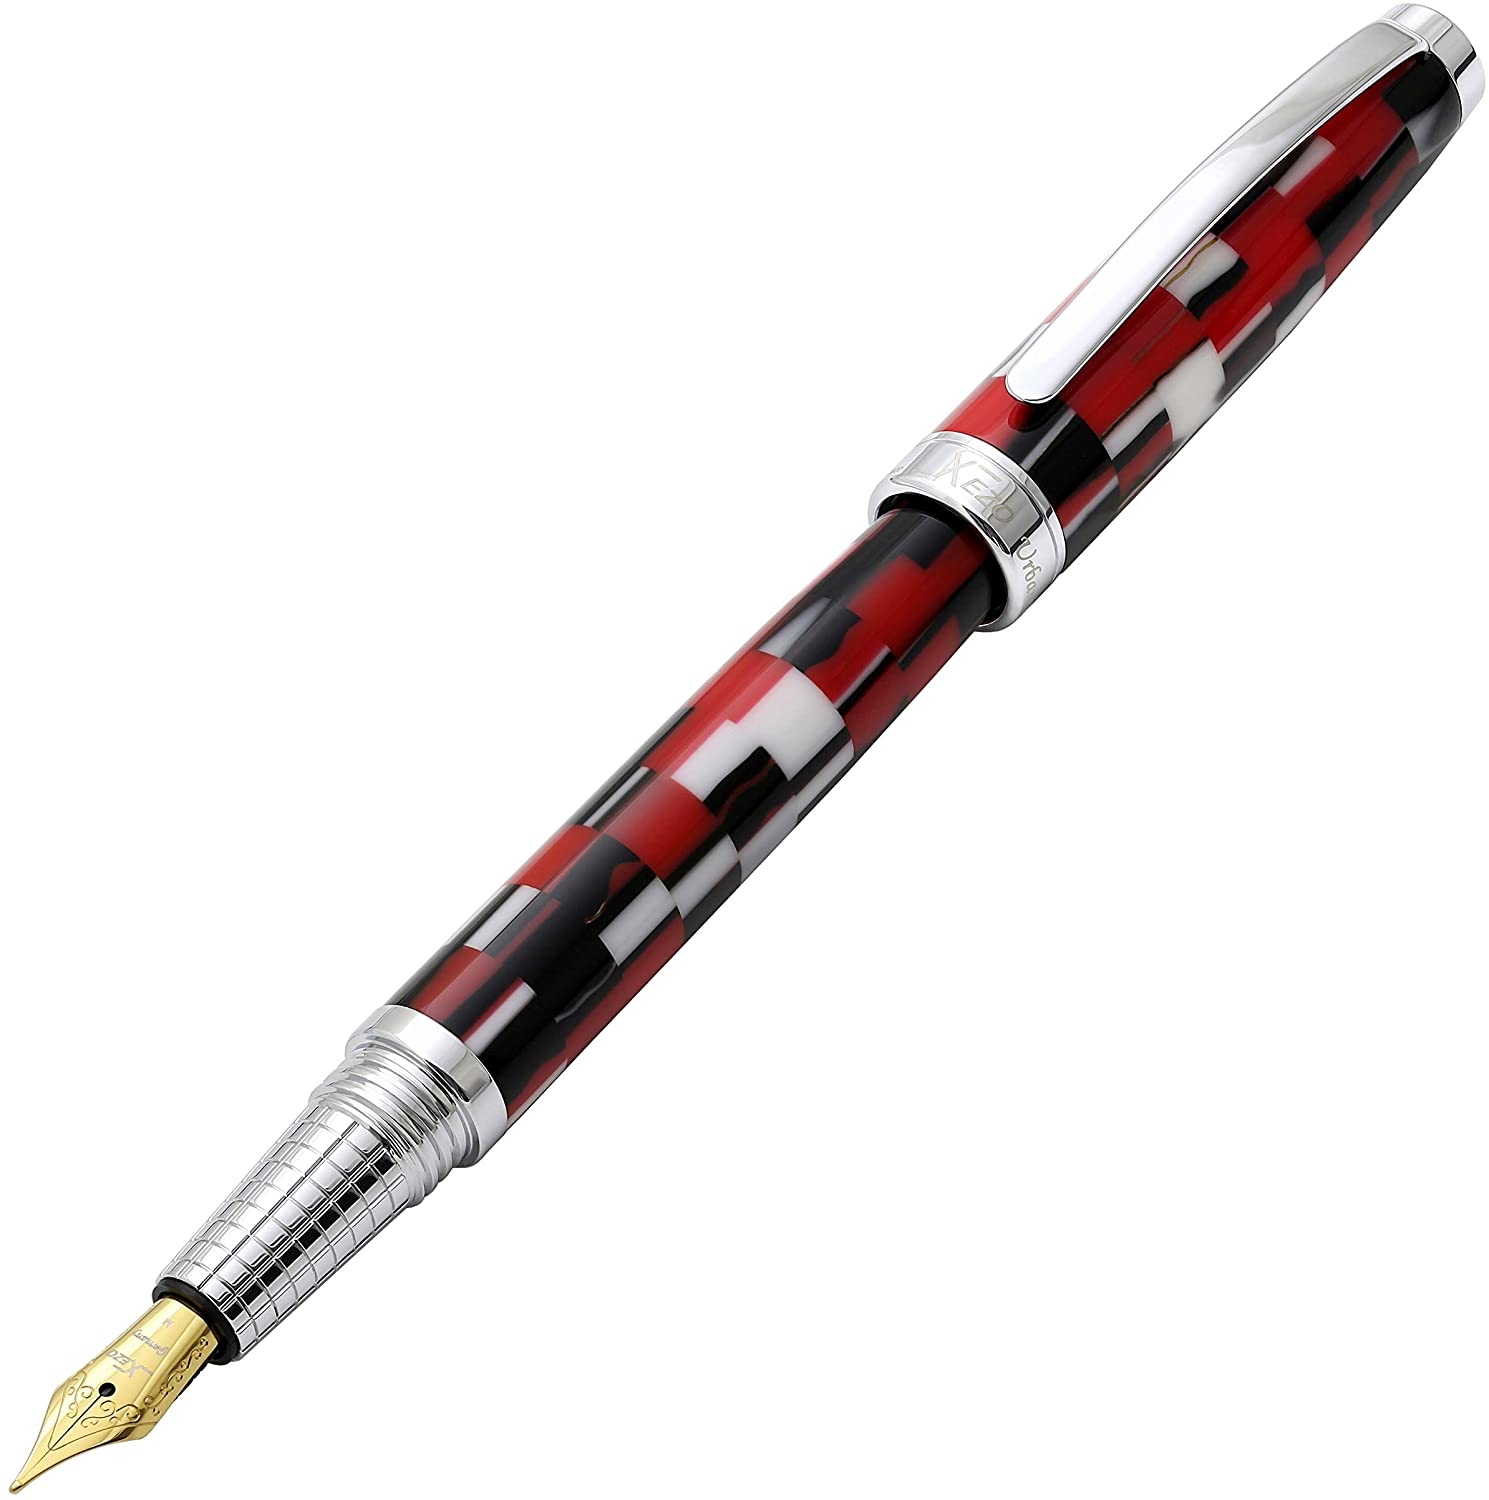 Xezo - Angled 3D view of the front of the Urbanite II Trek FM fountain pen